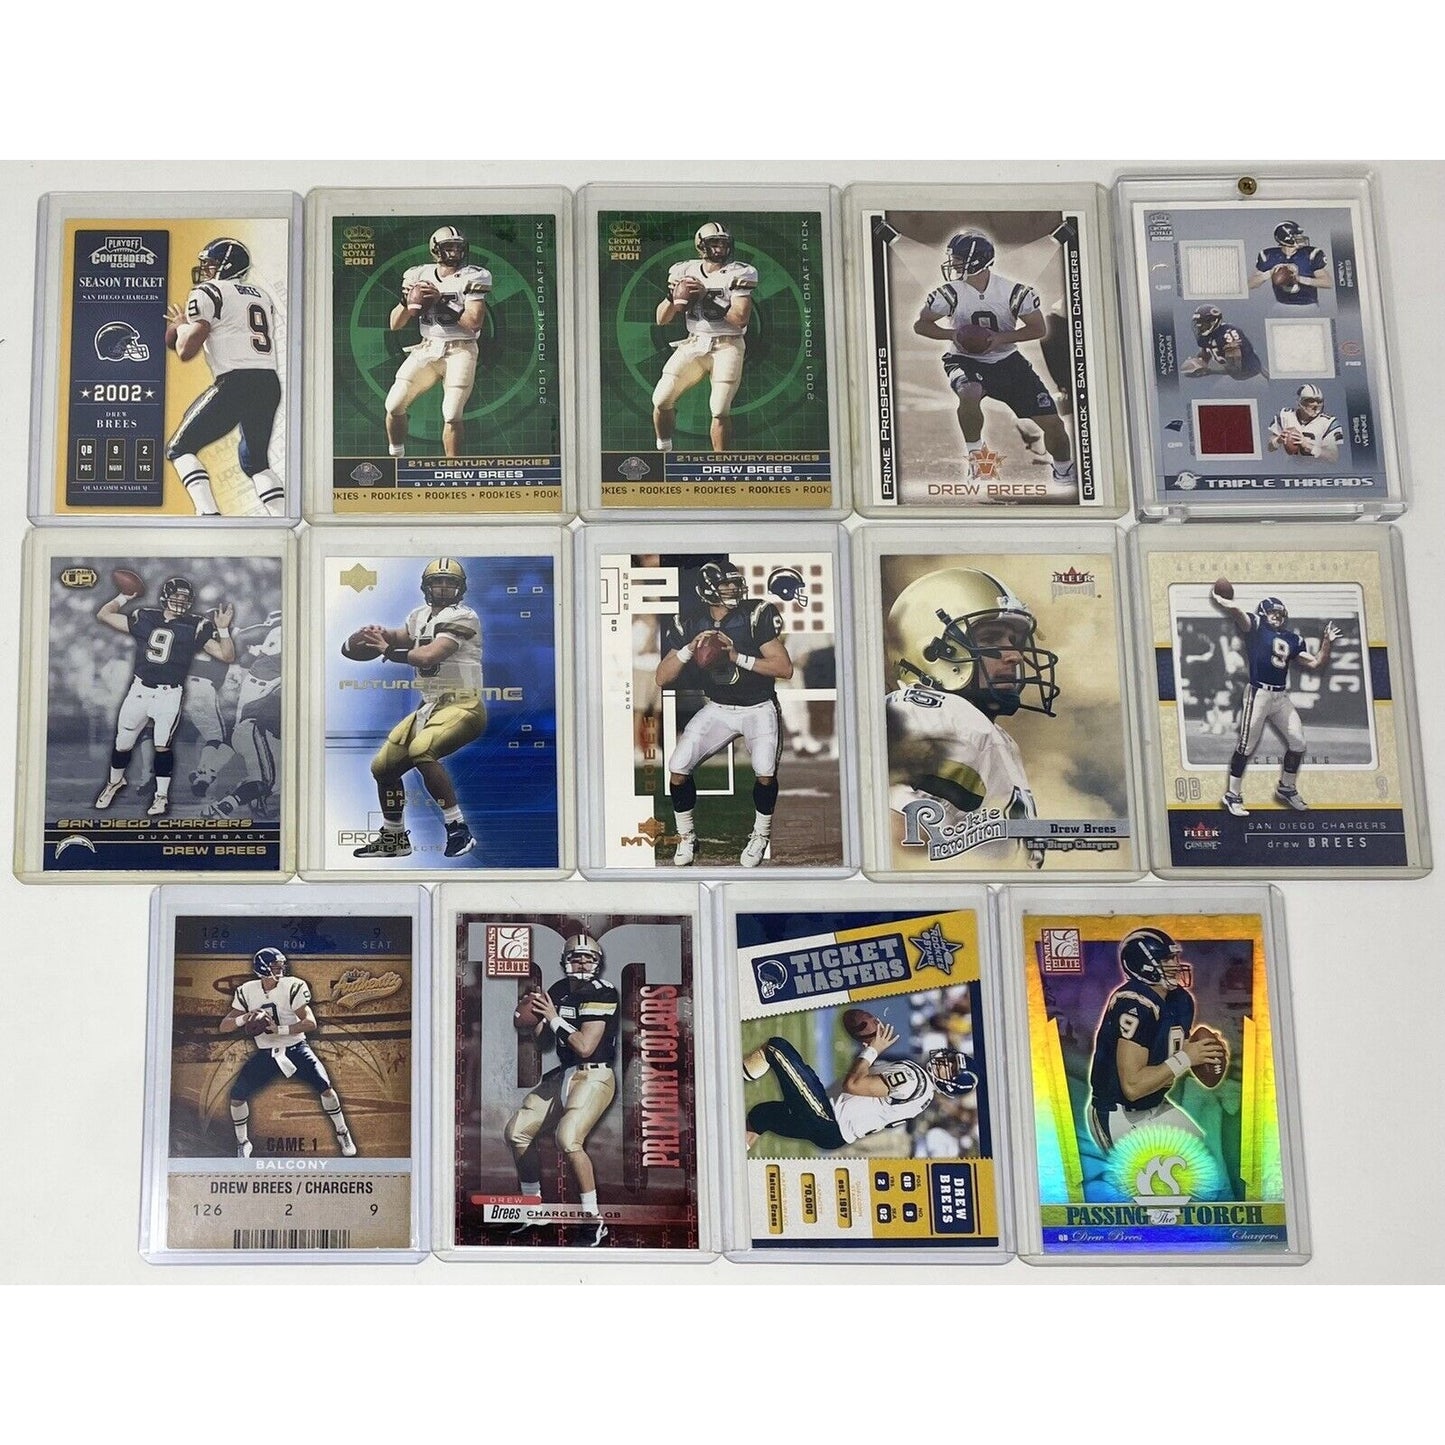 Mixed Lot of 33 Drew Brees San Diego Chargers NFL Football Trading Cards